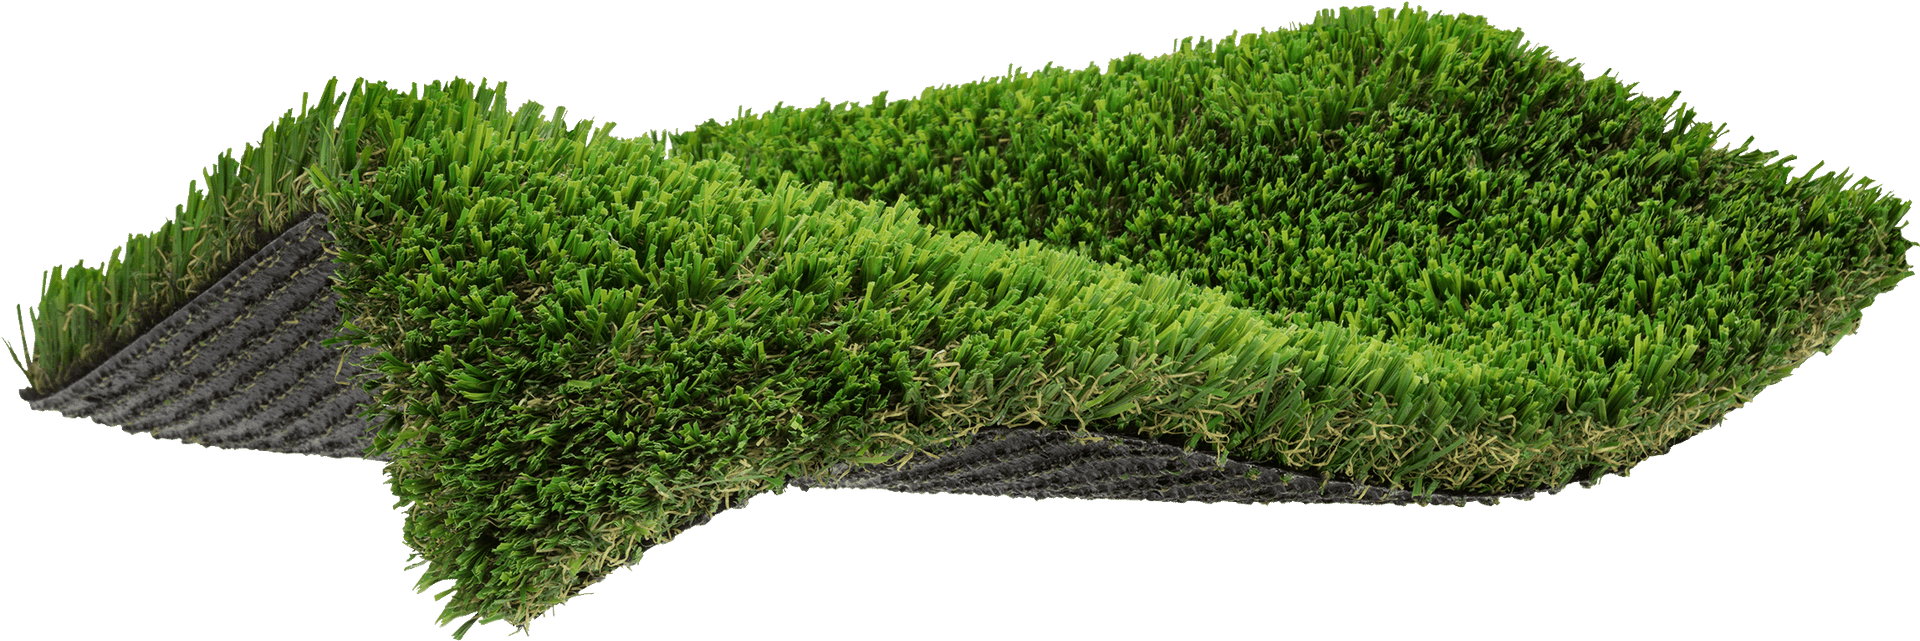 Artificial Turf Sample Texture PNG image